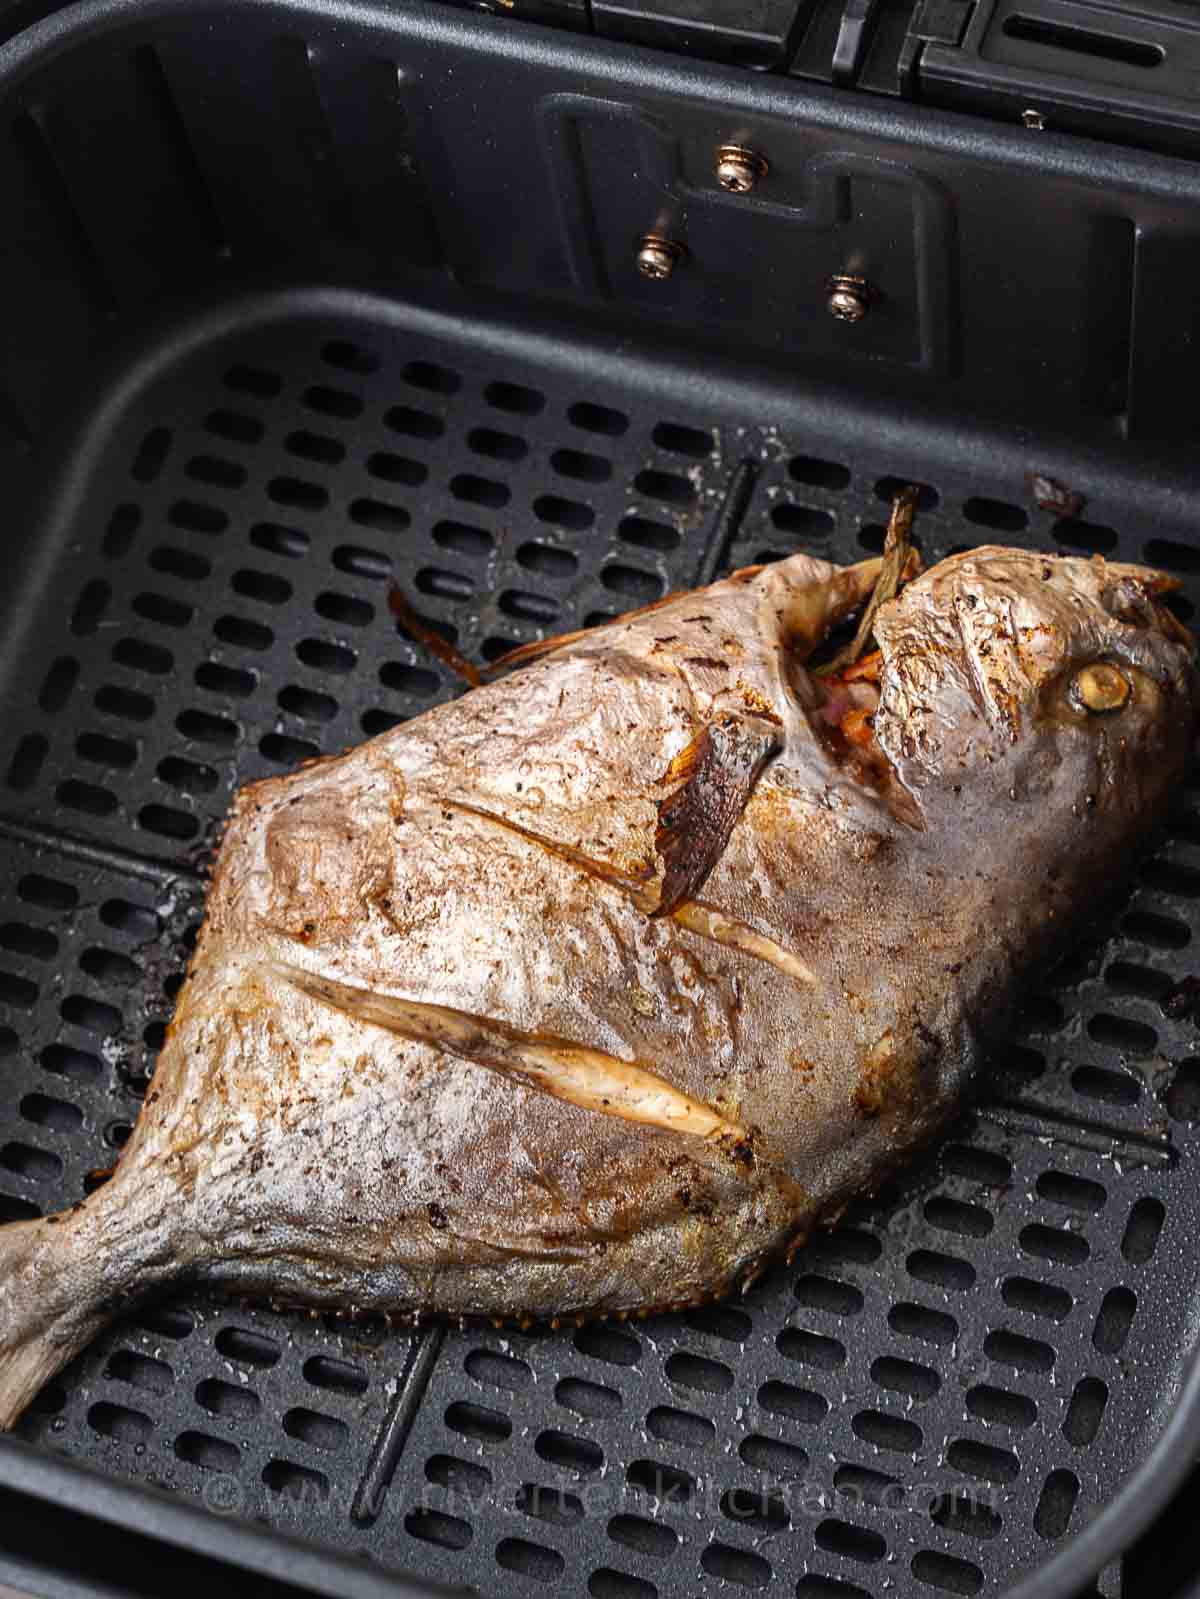 pomfret fish cooked in an air fryer.